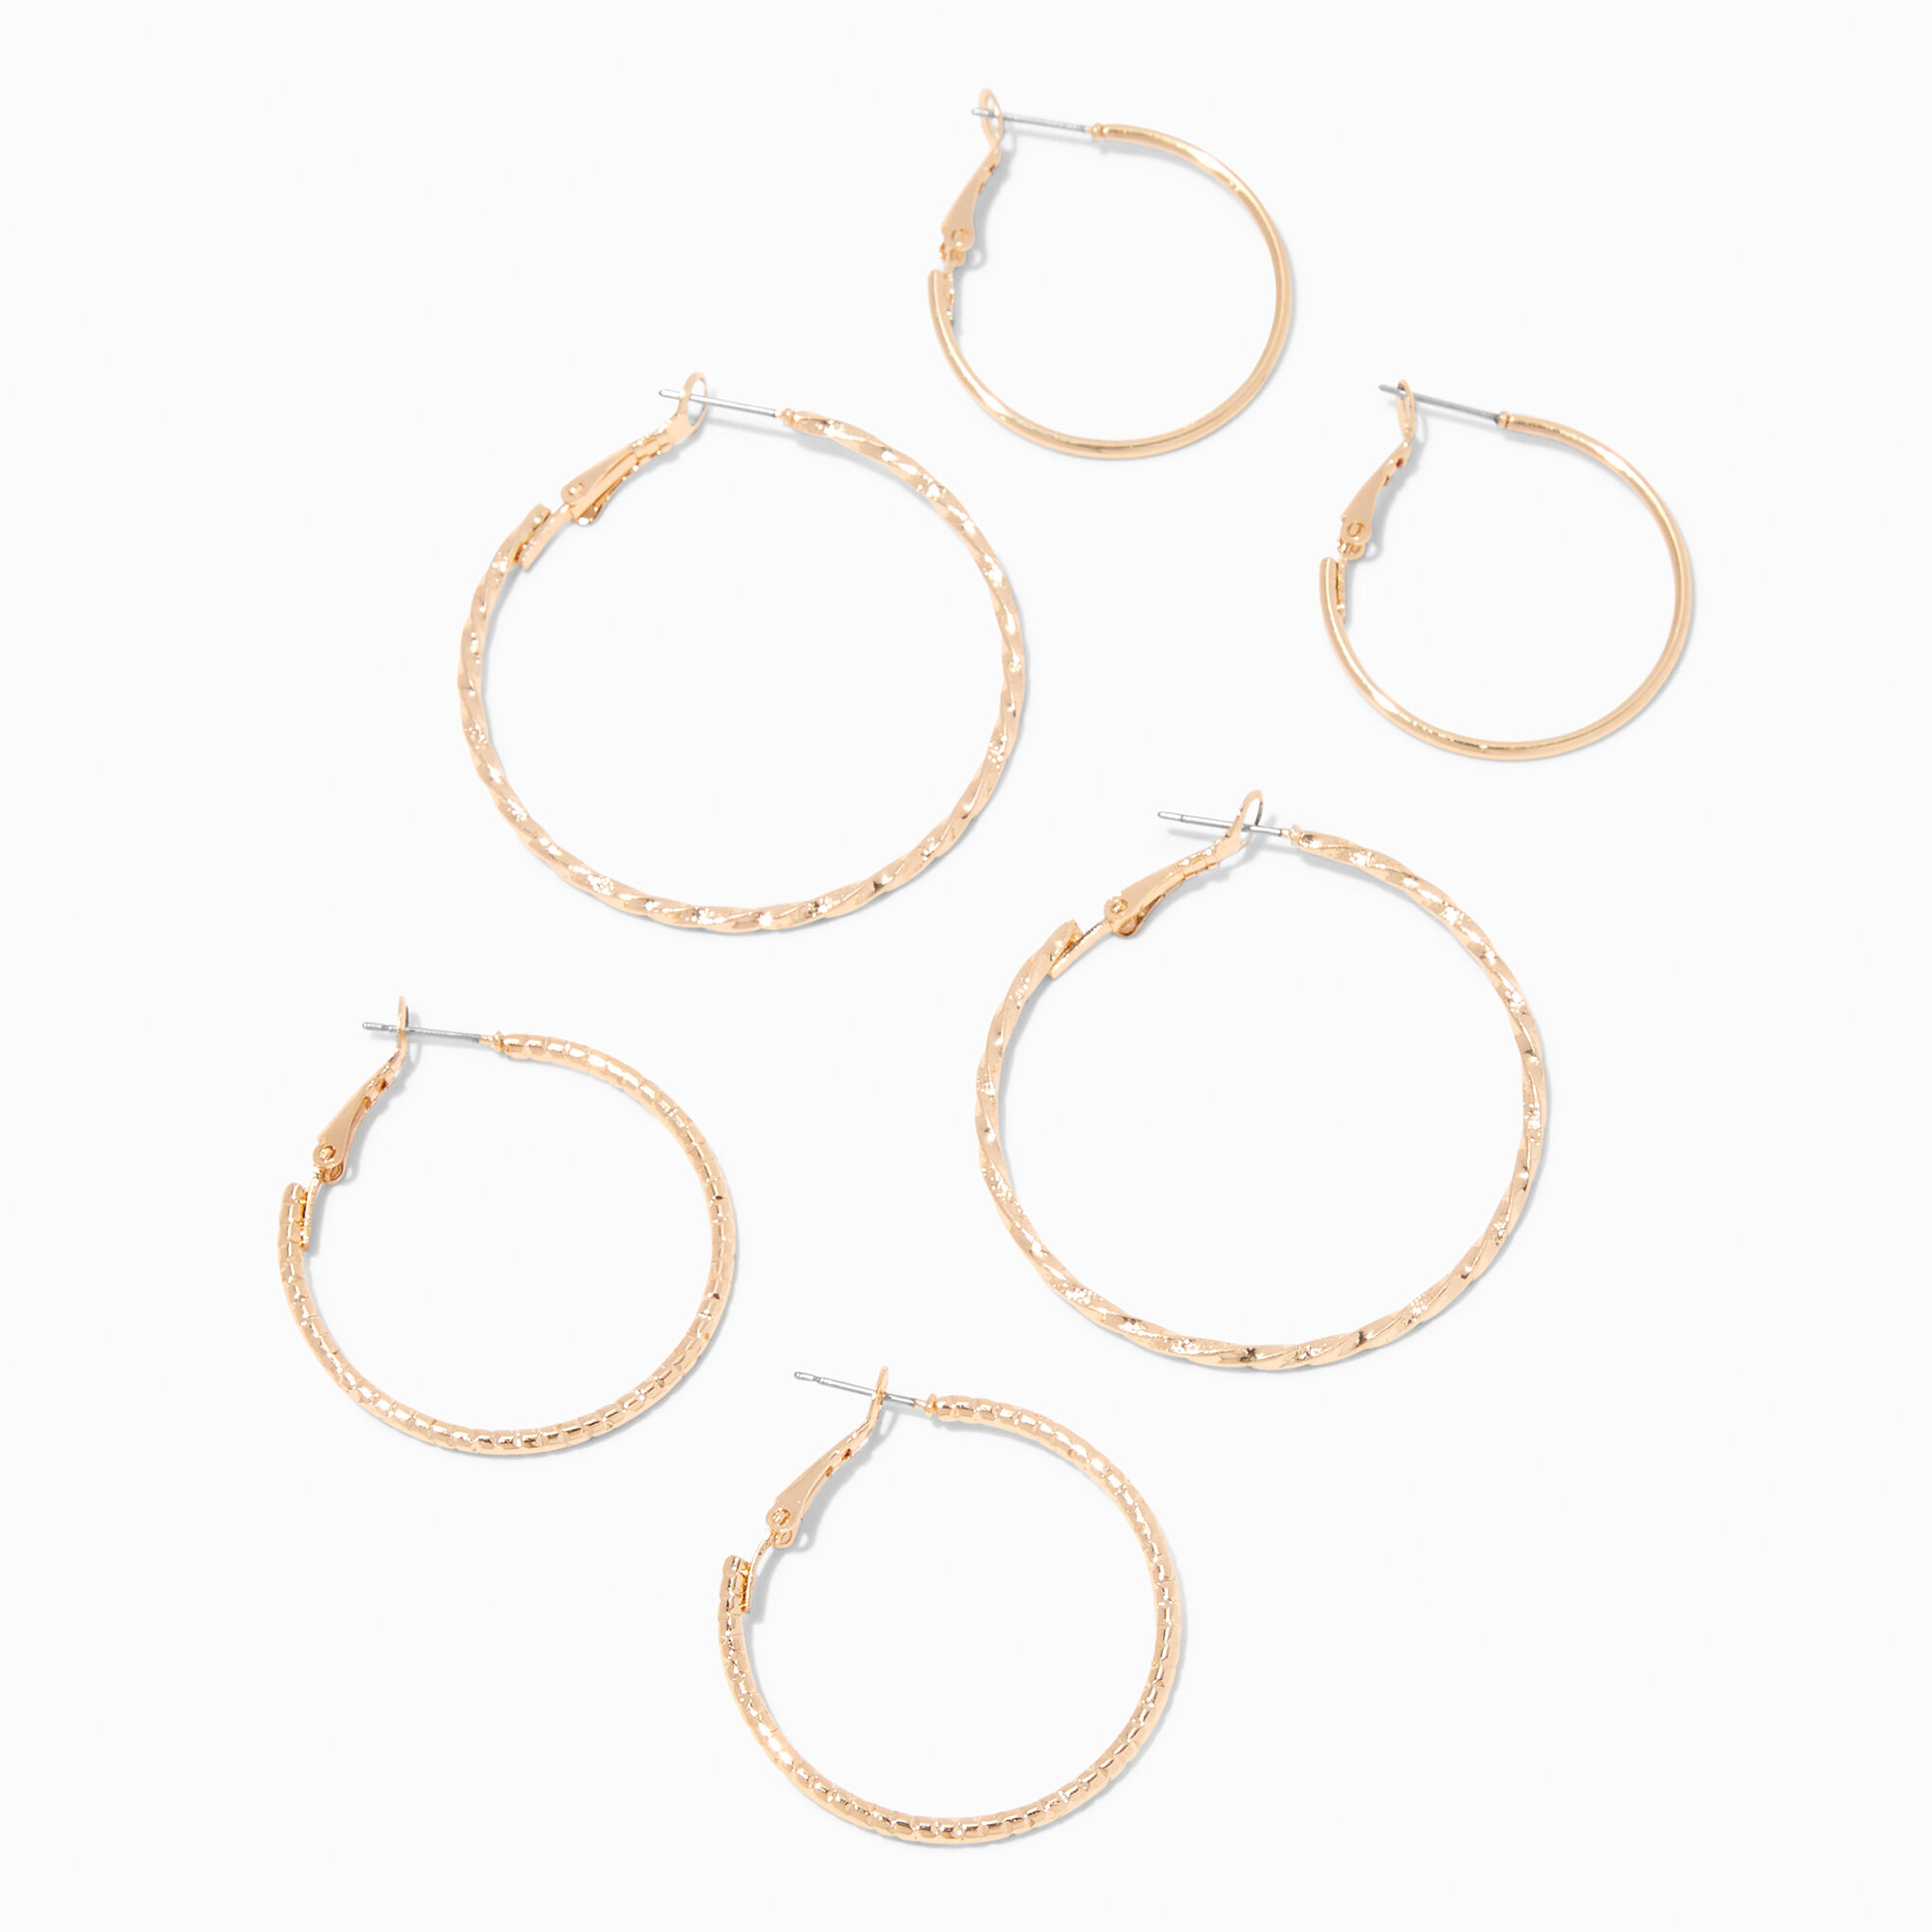 View Claires Tone Graduated Textured Hinge Hoop Earrings 3 Pack Gold information